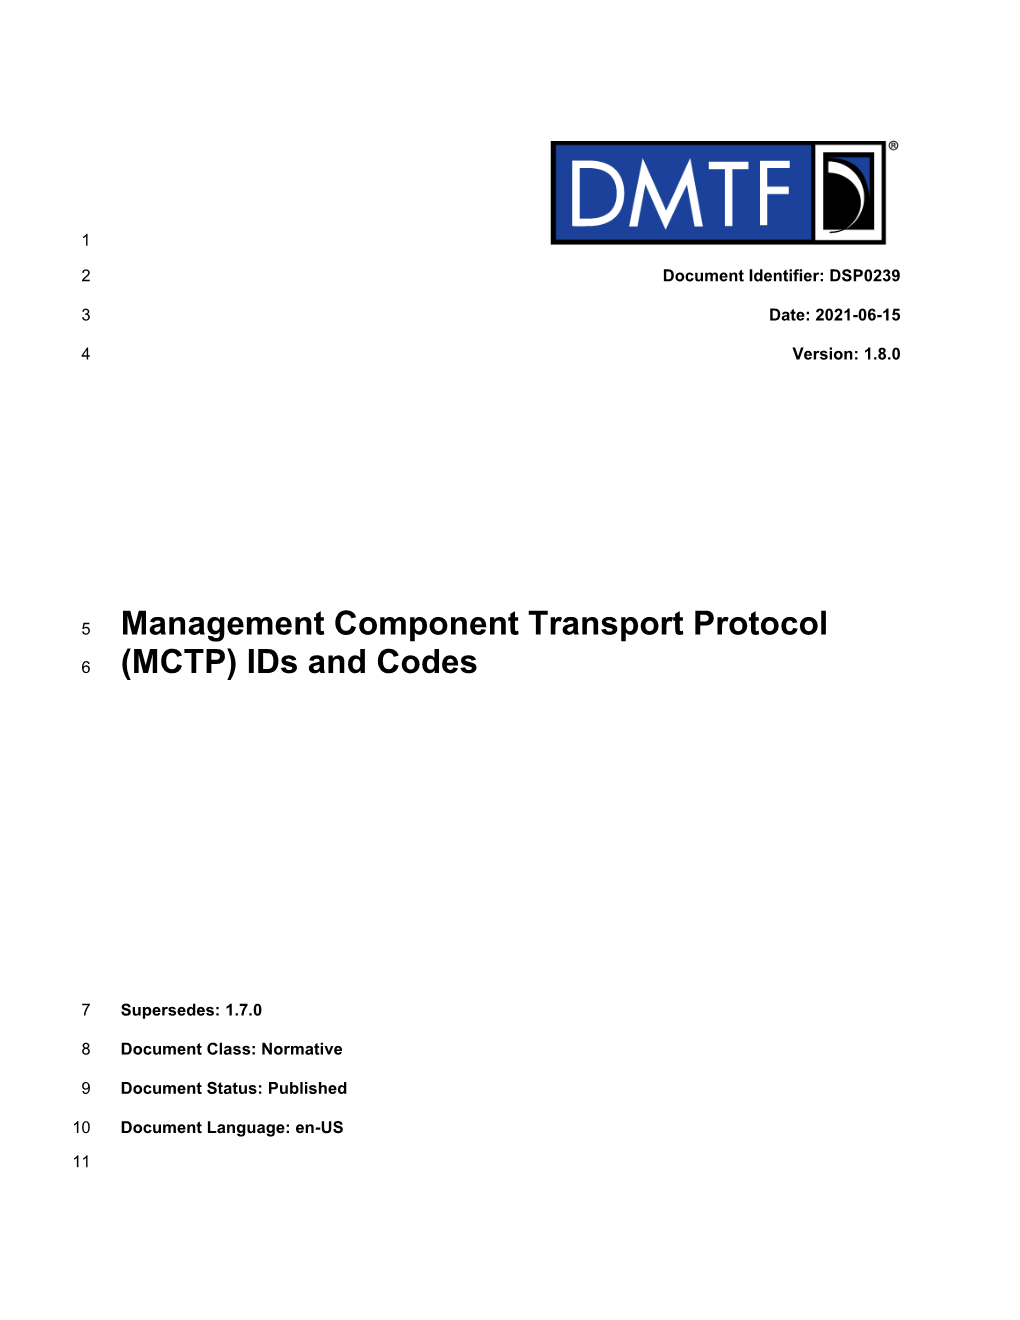 Management Component Transport Protocol (MCTP) Ids and Codes DSP0239